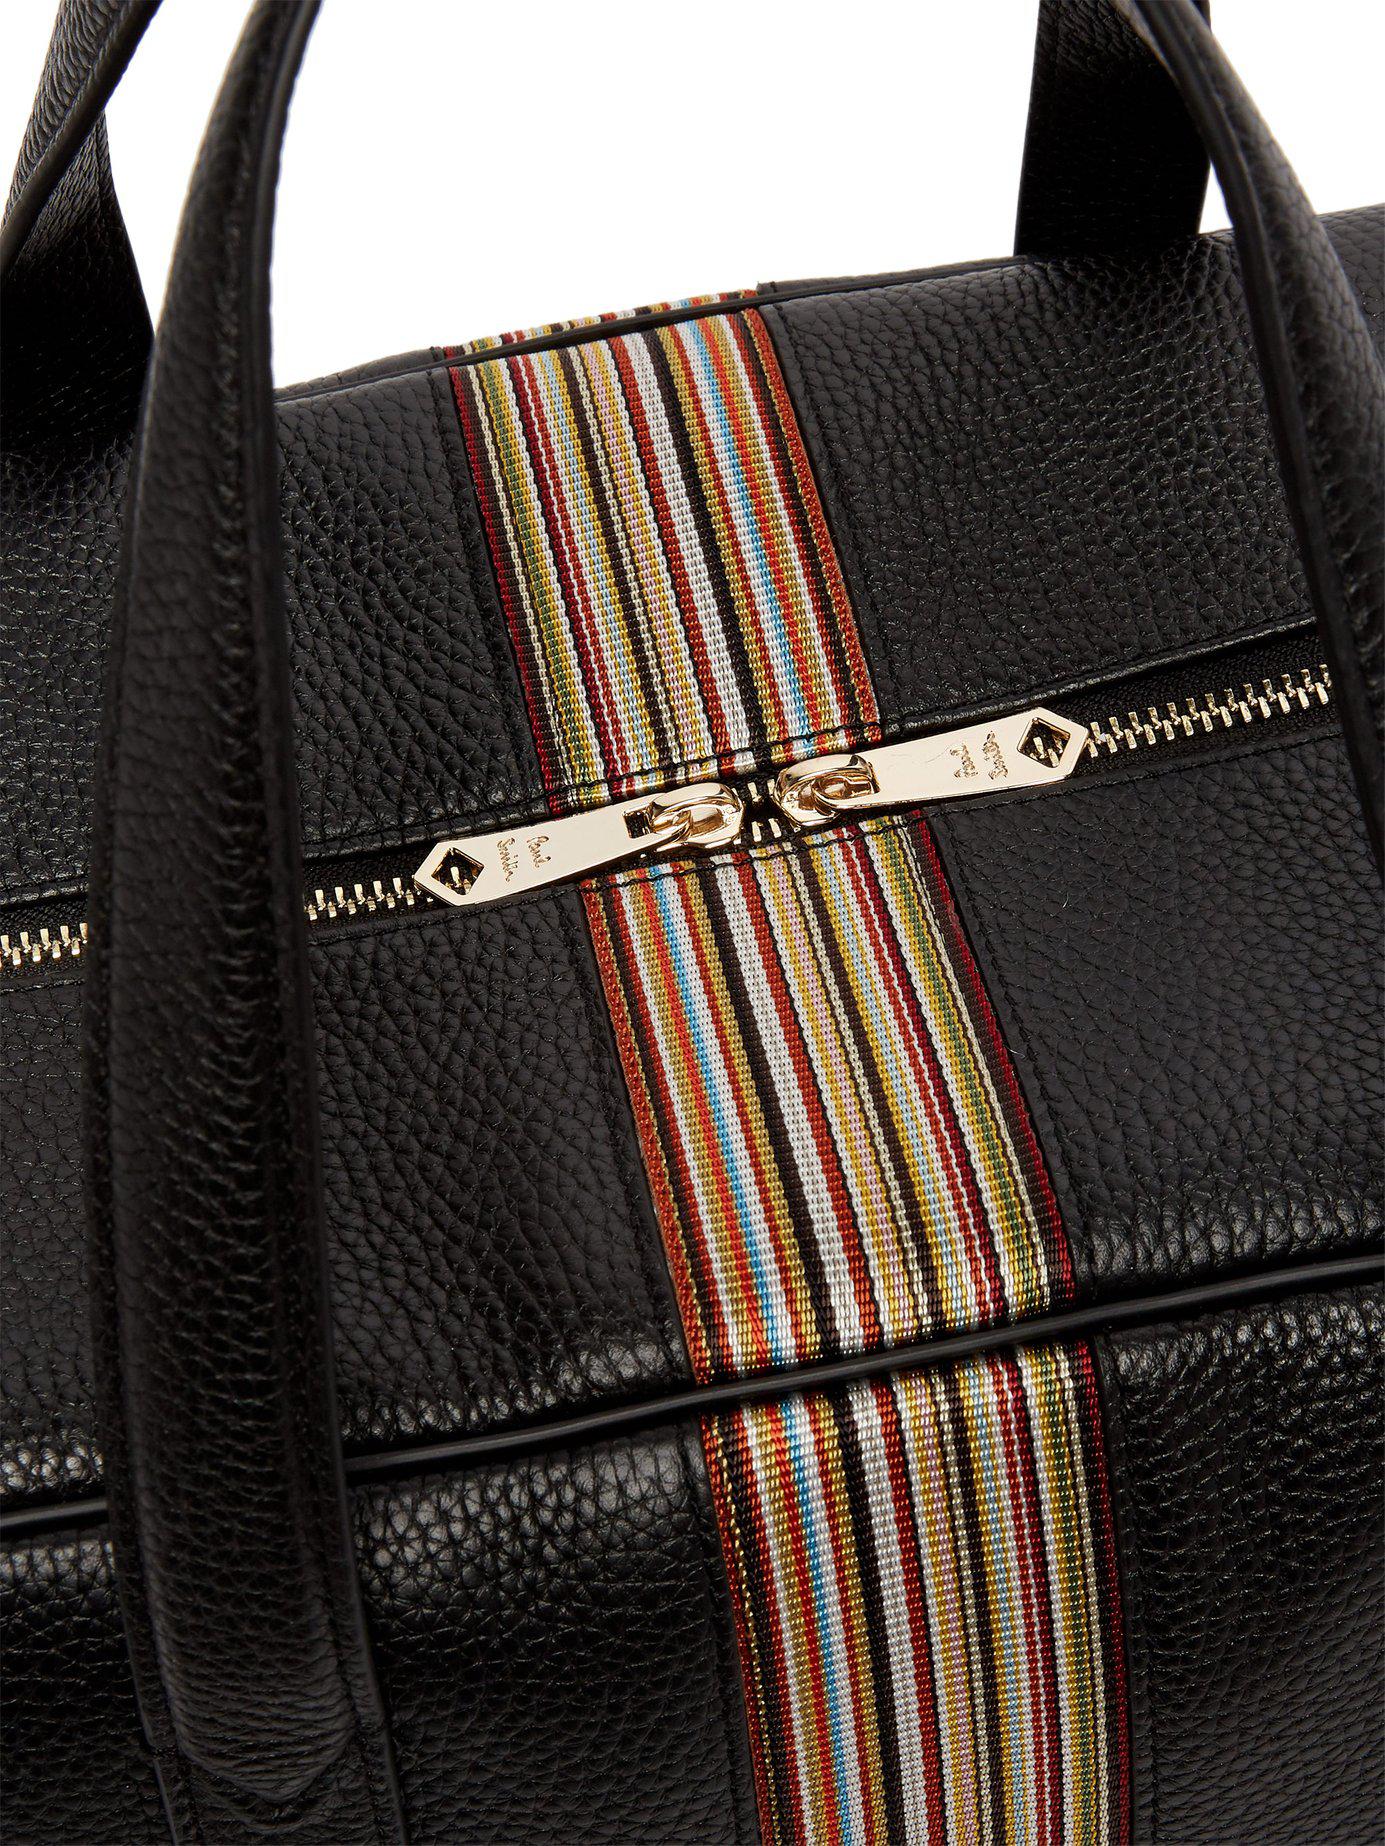 Paul Smith Signature Stripe Pebbled Leather Weekend Bag in Black for Men - Lyst